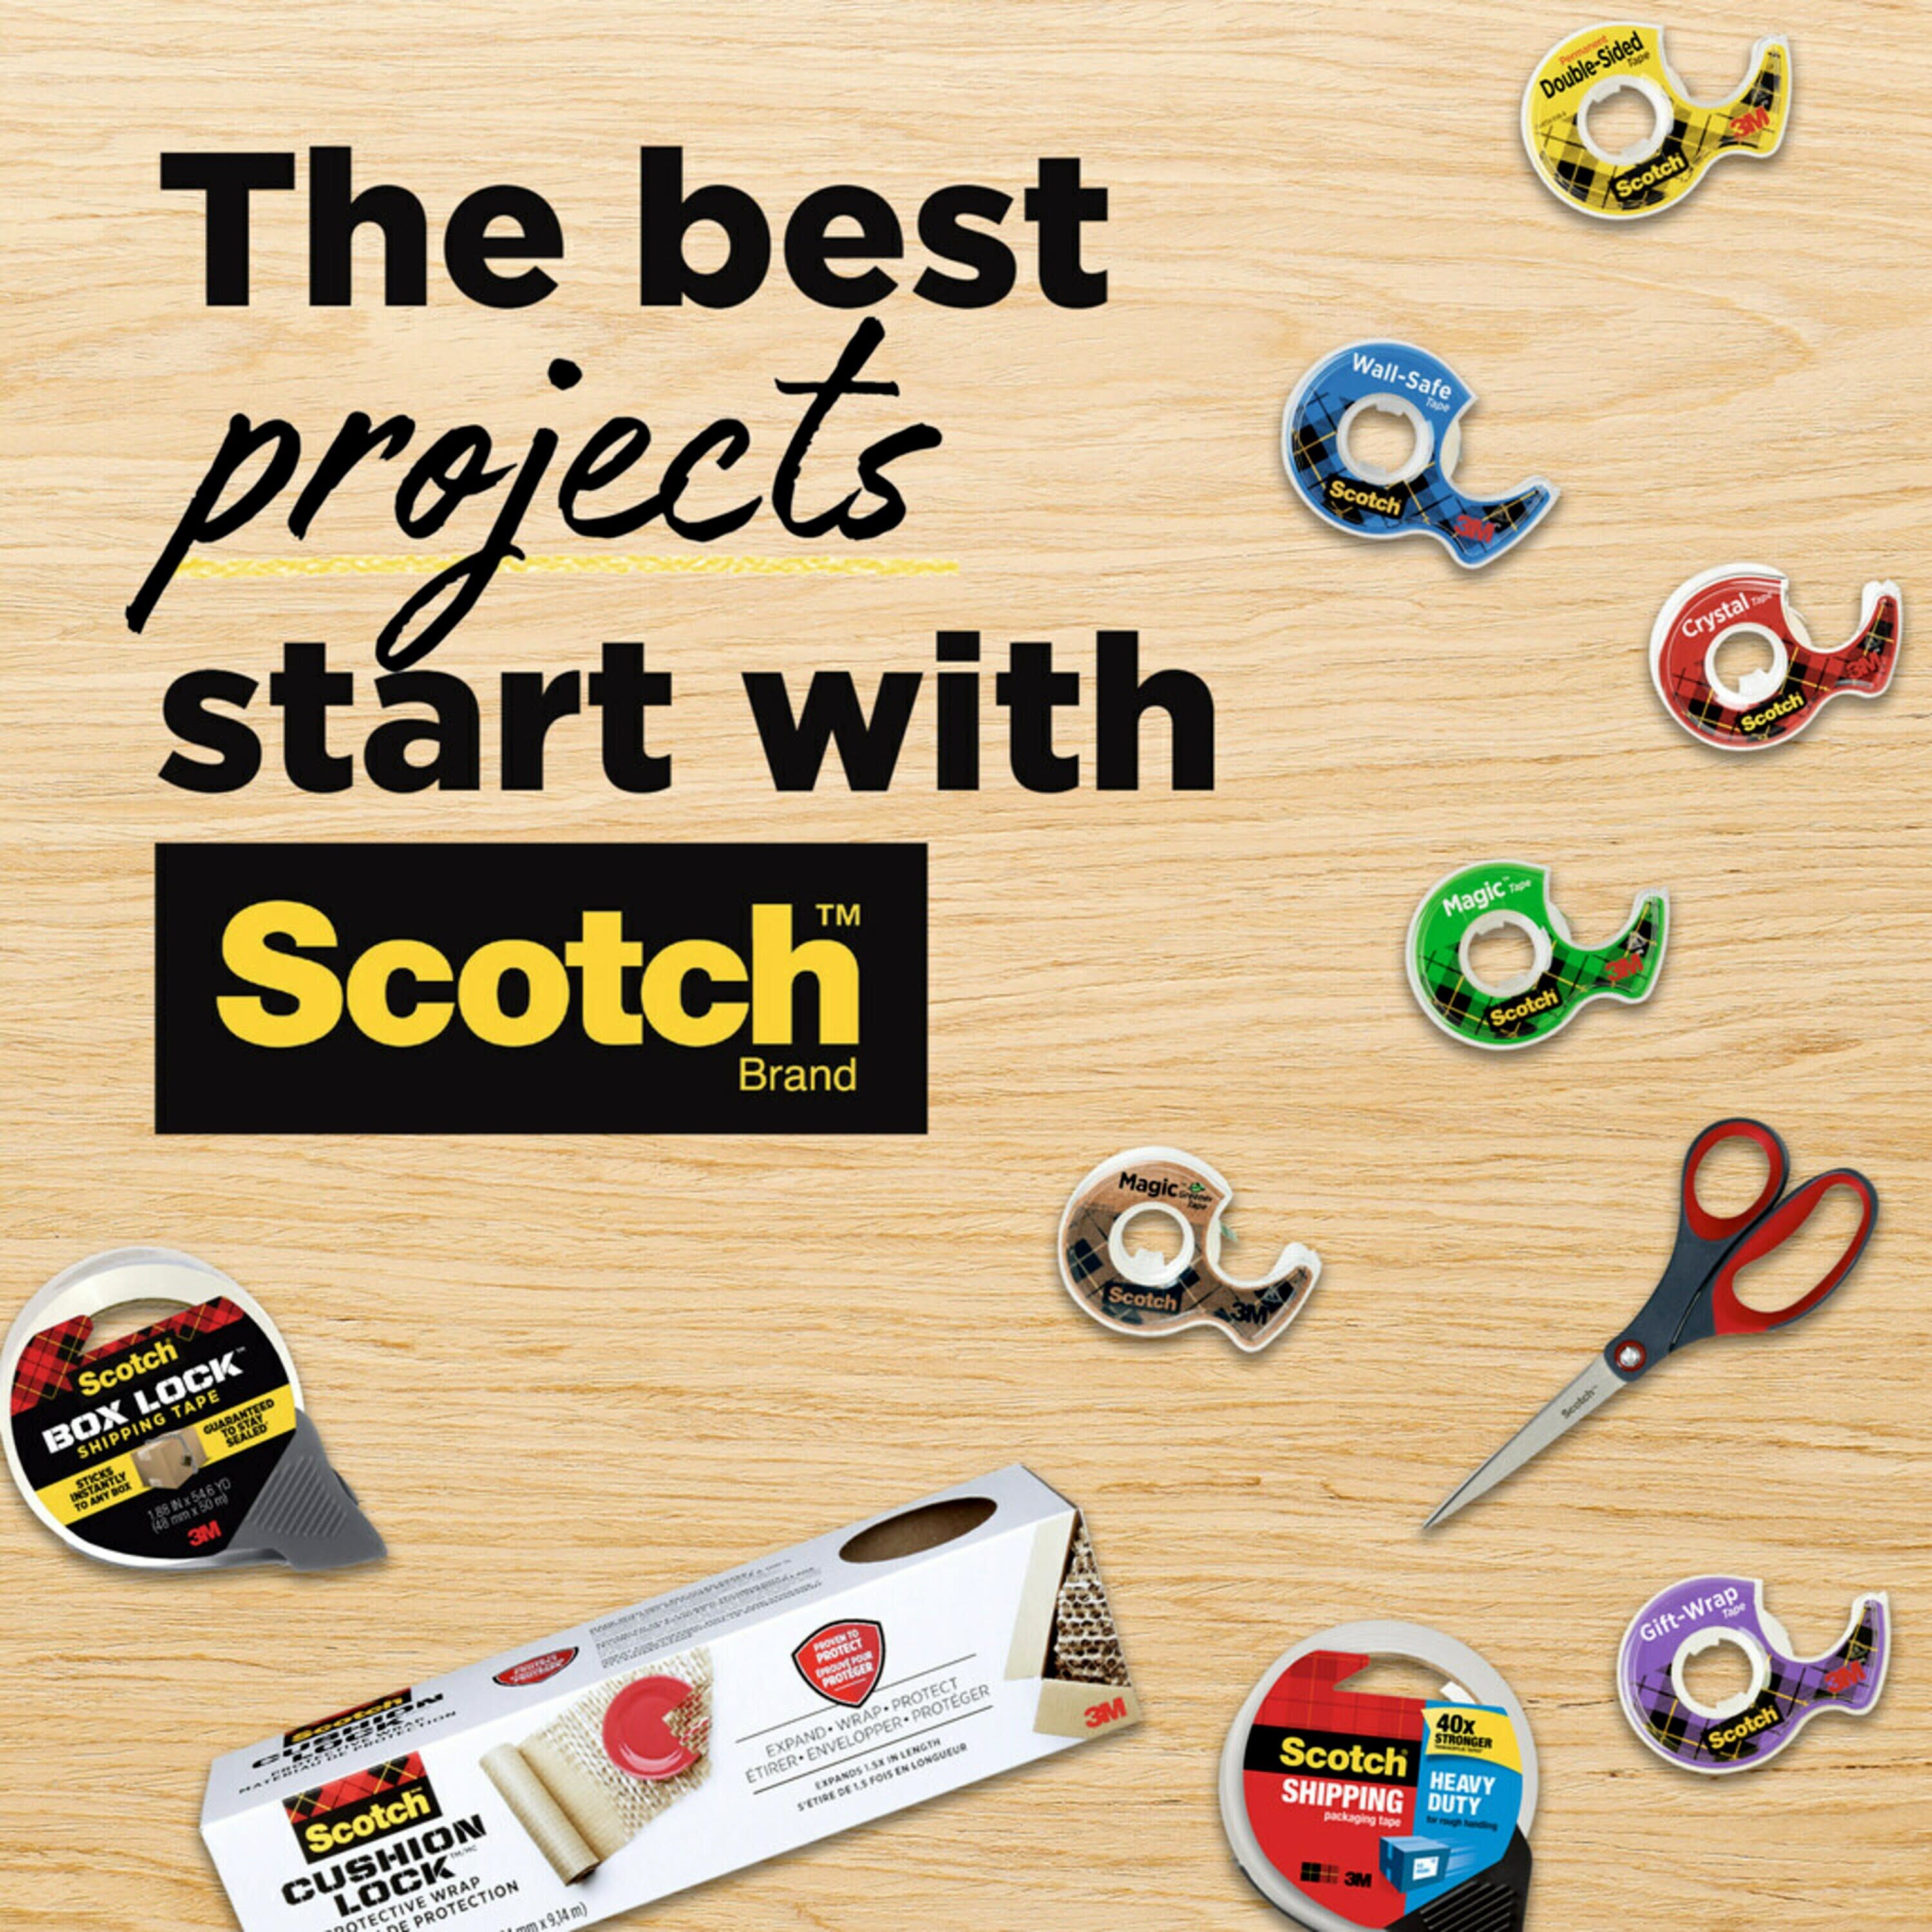 Scotch 2020 Contractor Grade 0.94-in x 60 Yard(s) Masking Tape